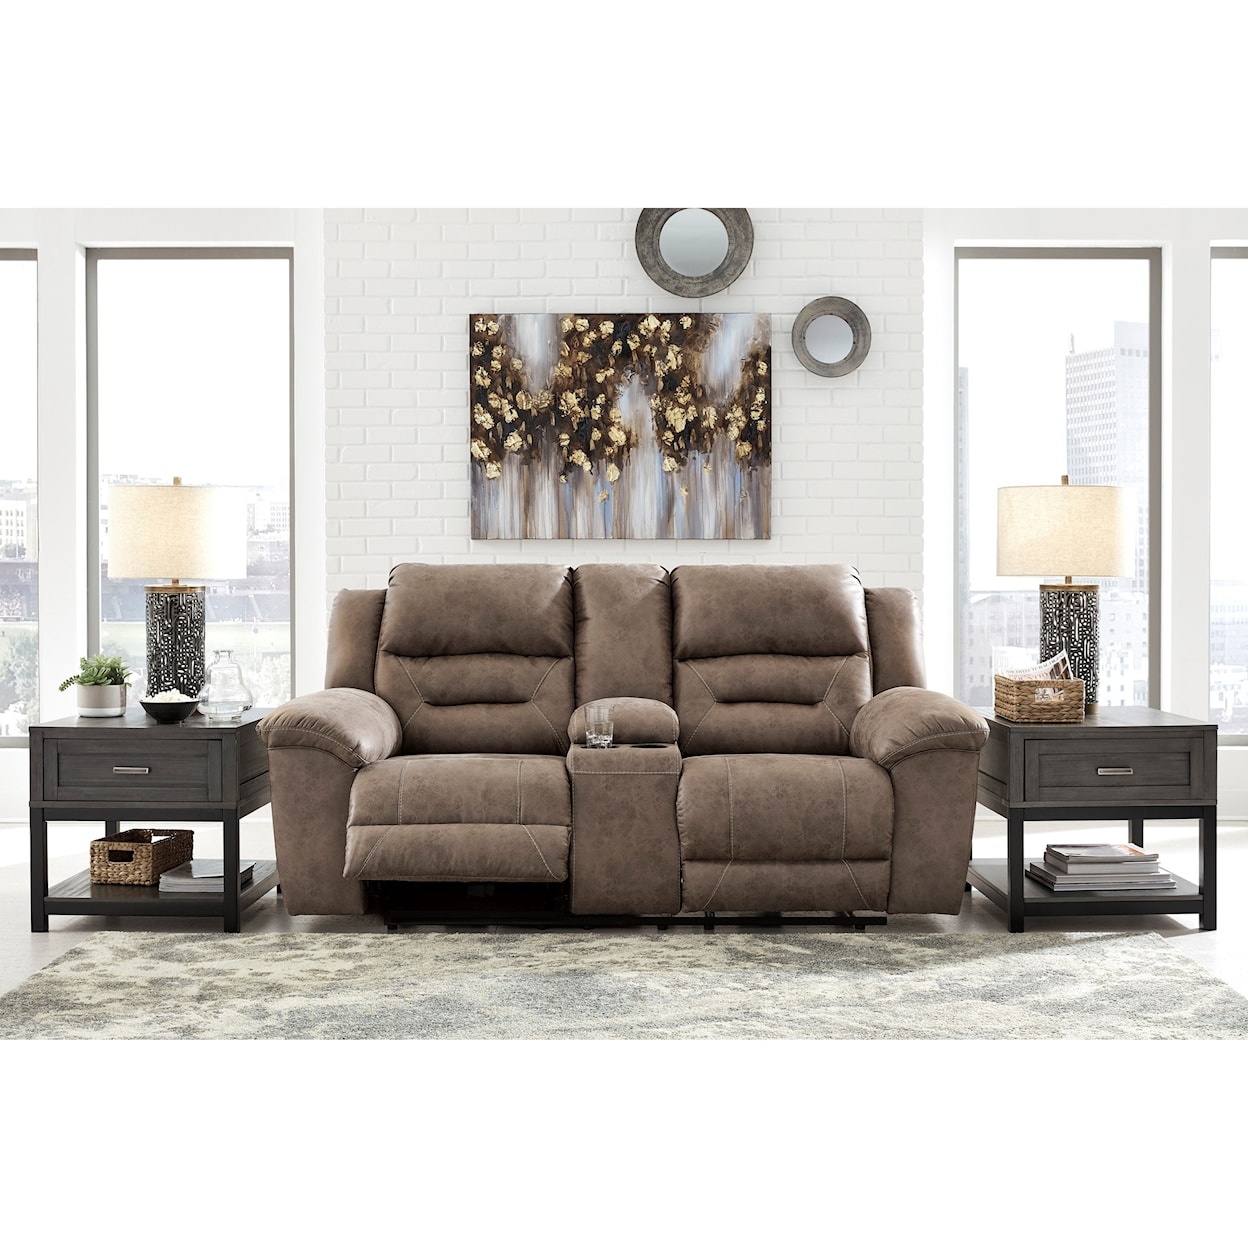 Signature Design by Ashley Stoneland Double Recl Power Loveseat w/ Console